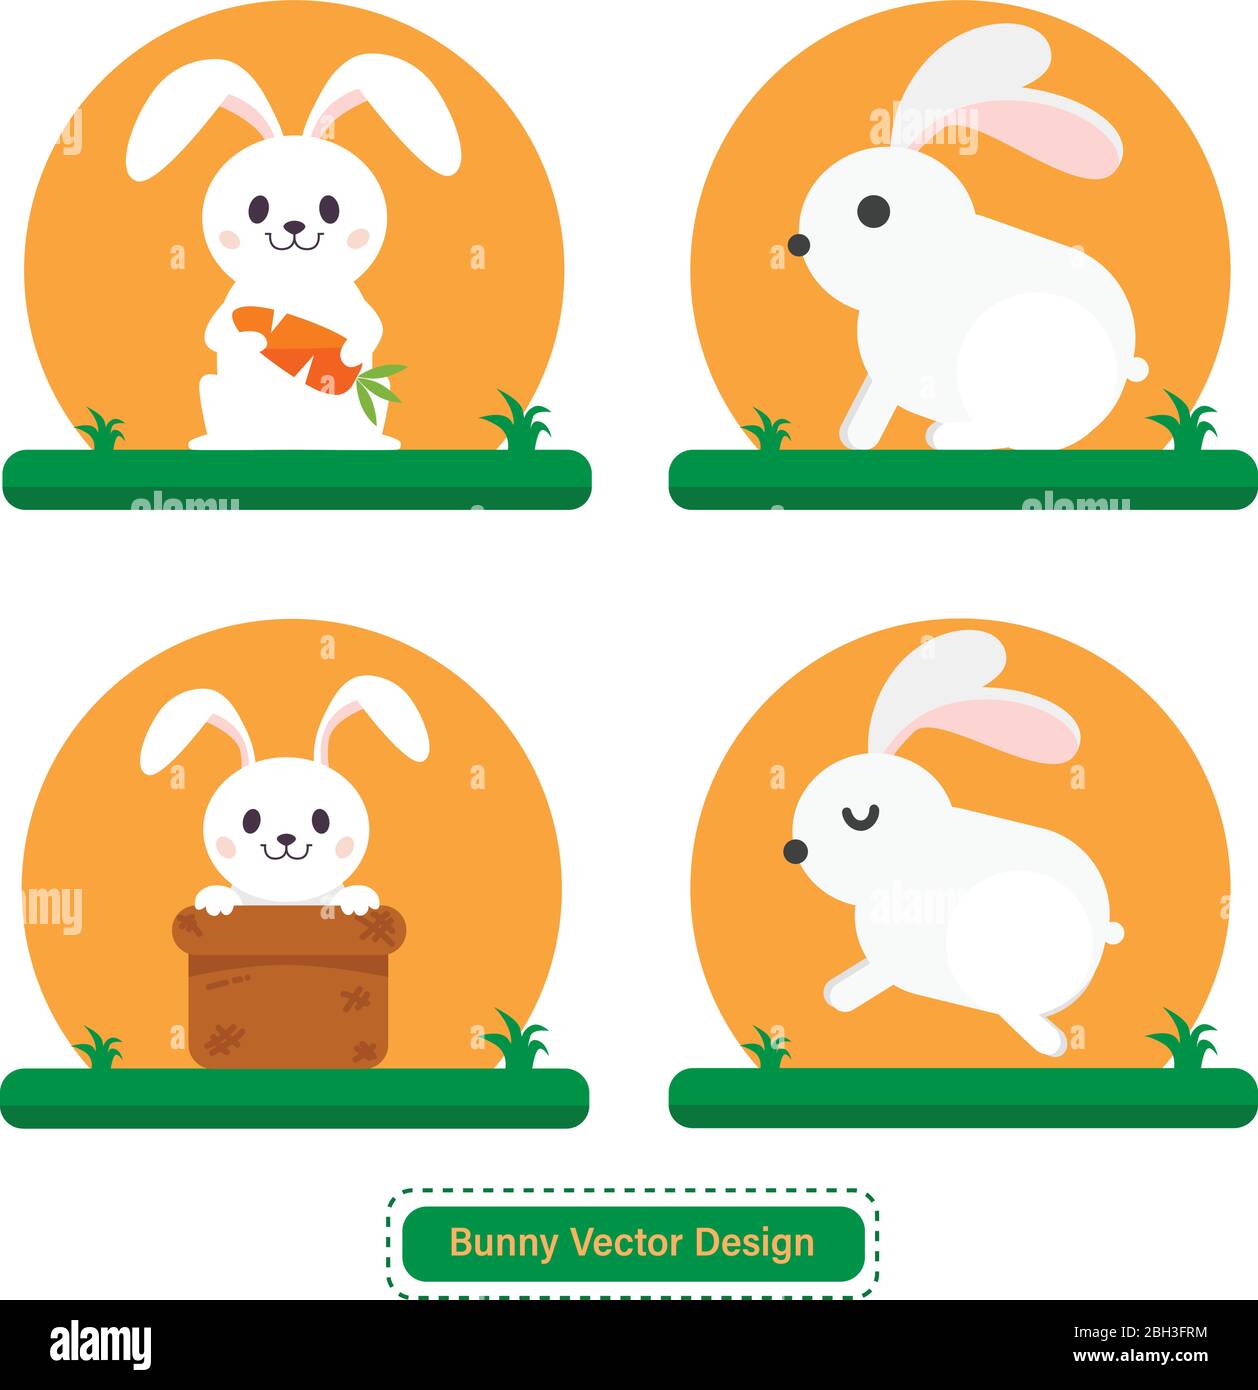 Cute Rabbit or Bunny Vector for icon templates or presentation background. Rabbit icon for pet shop logo. Able to use for website or mobile apps icon Stock Vector